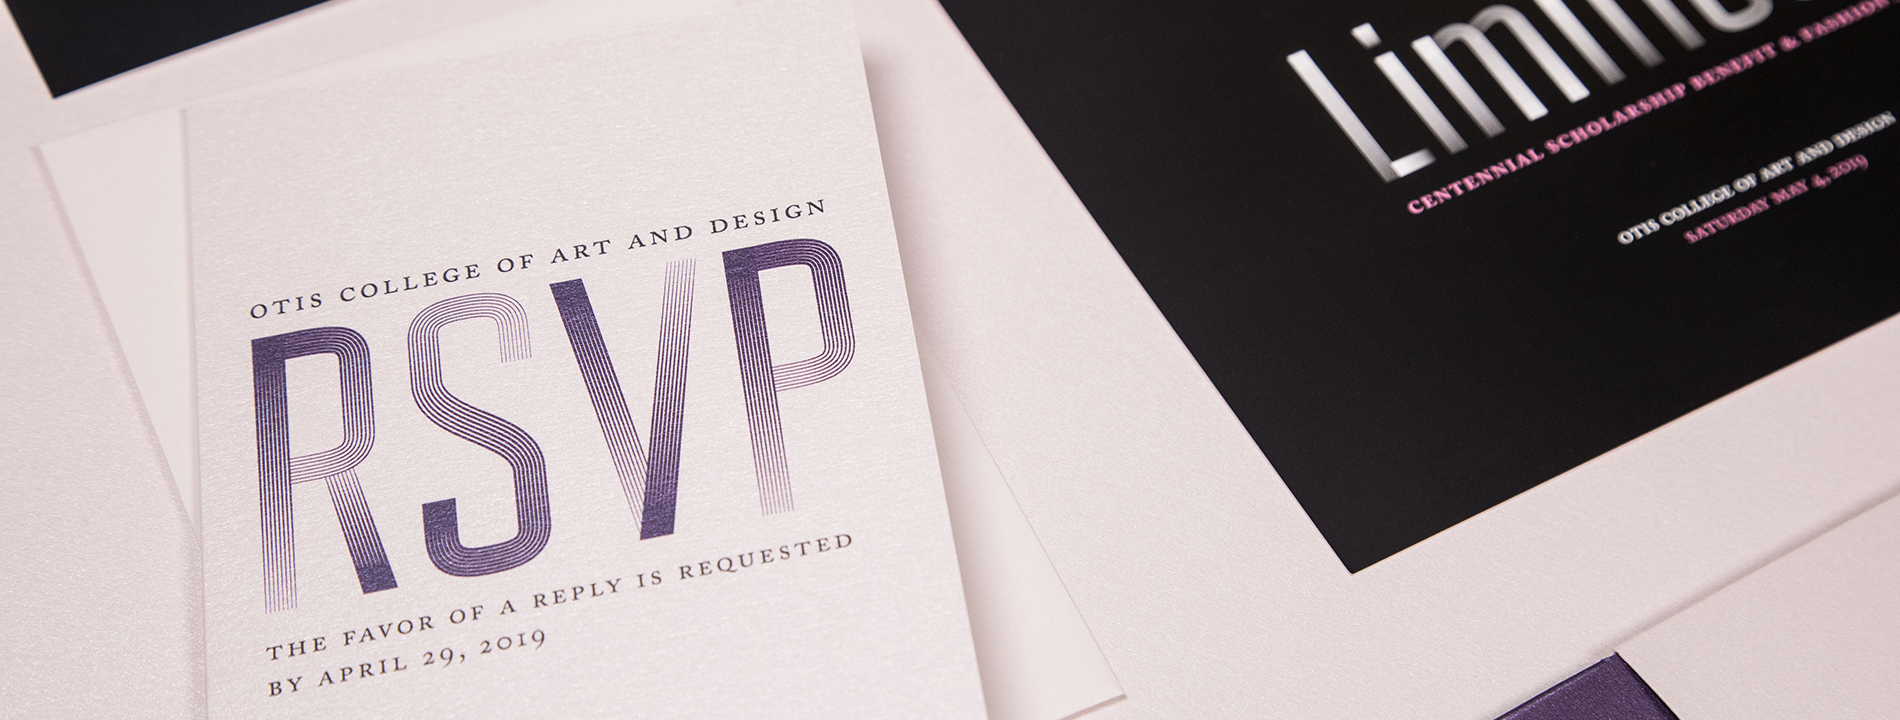 Close-up of RSVP card laying next to an invitation